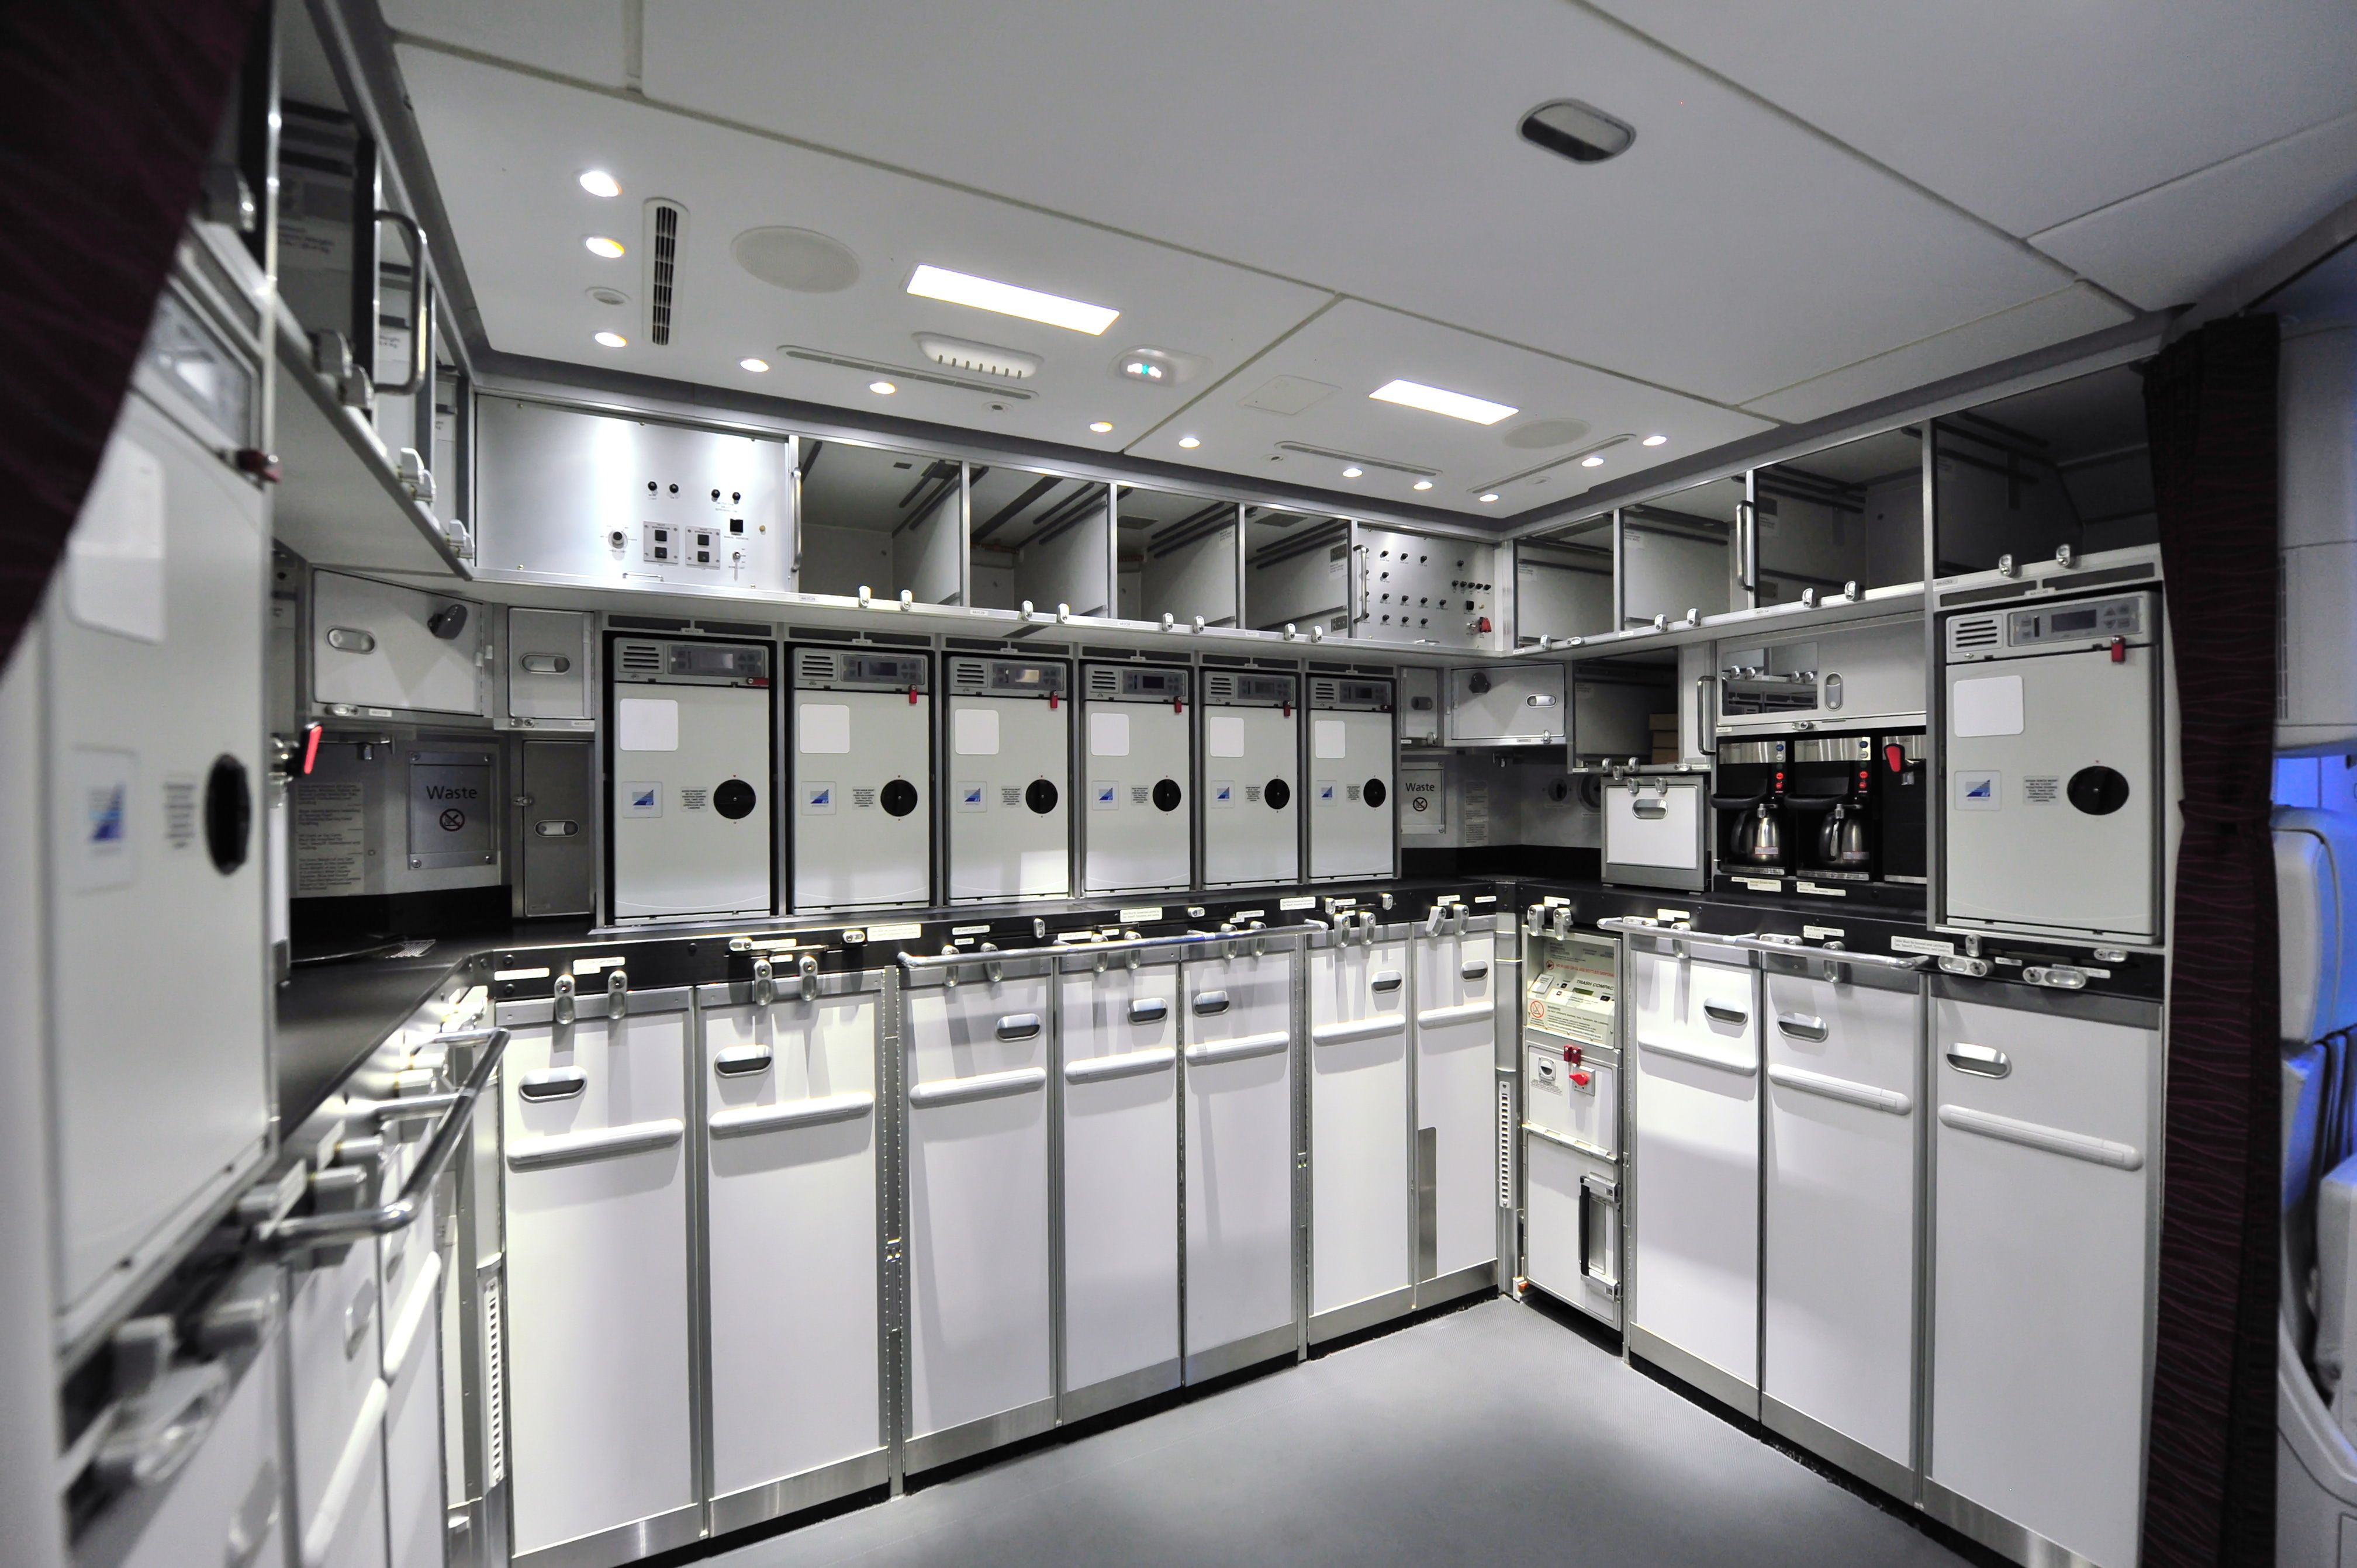 The back galley on a Boeing 777.